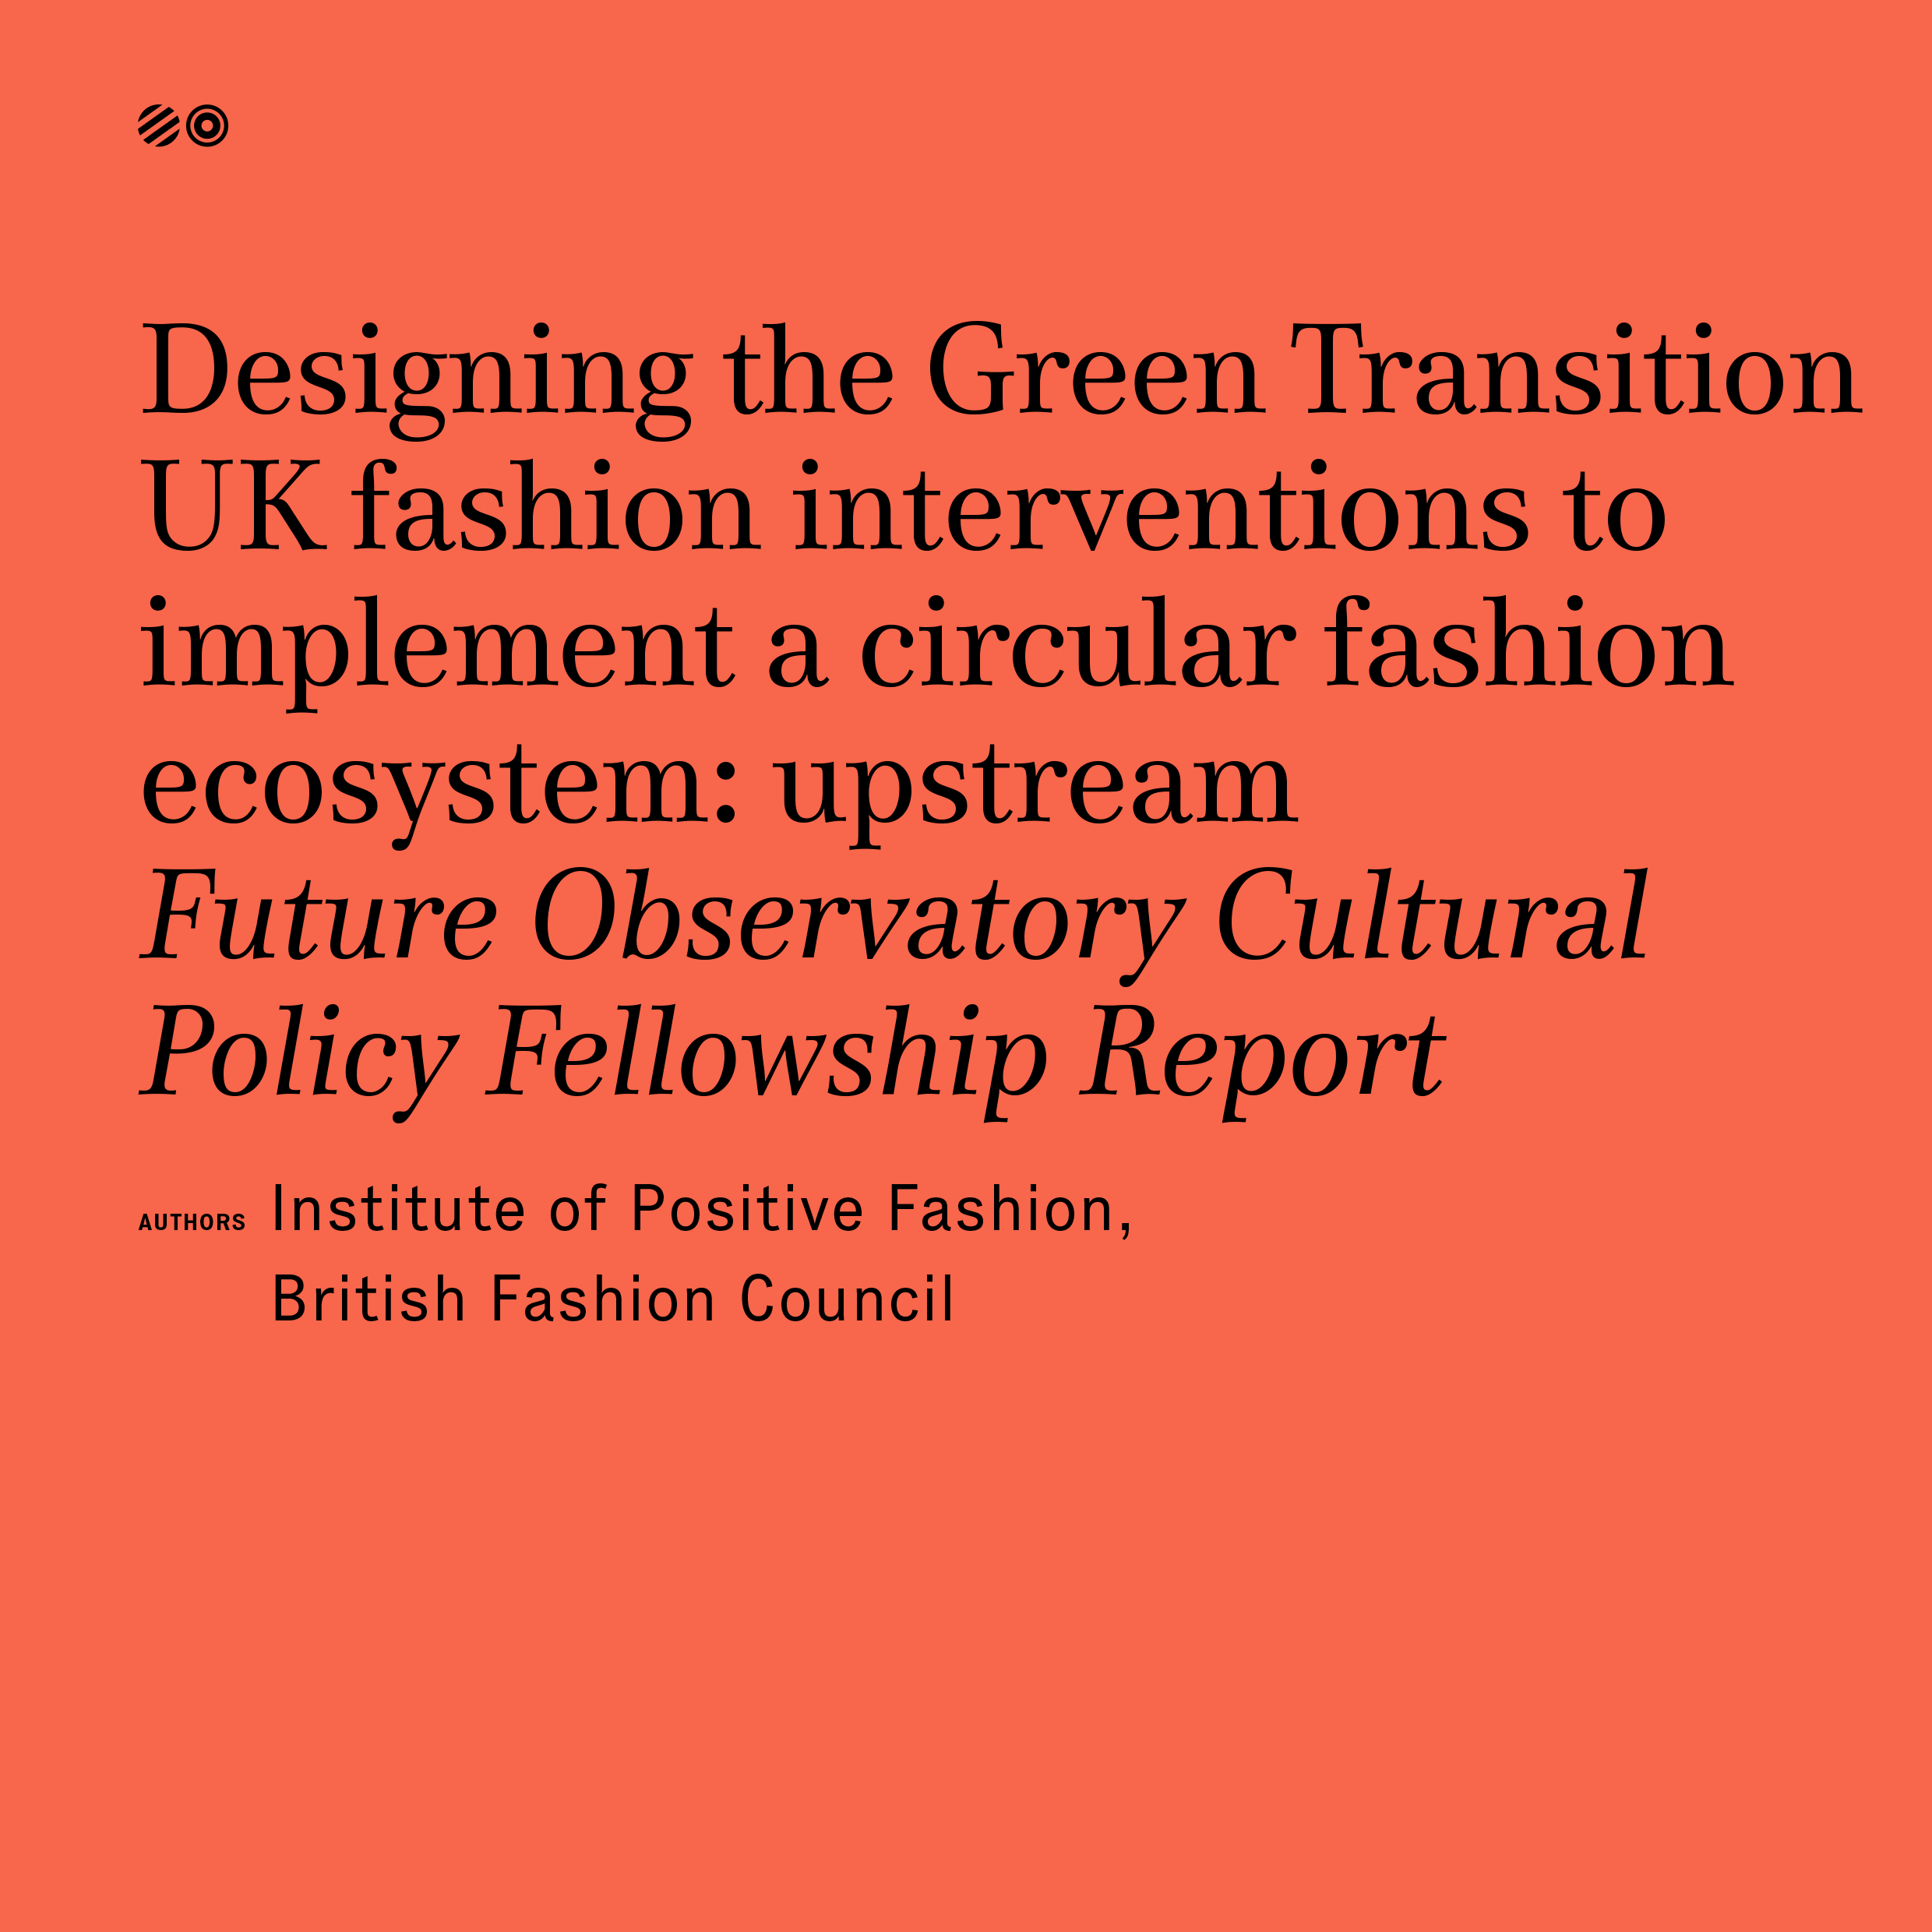 future-observatory-cultural-policy-report_bfc-ipf-1.png